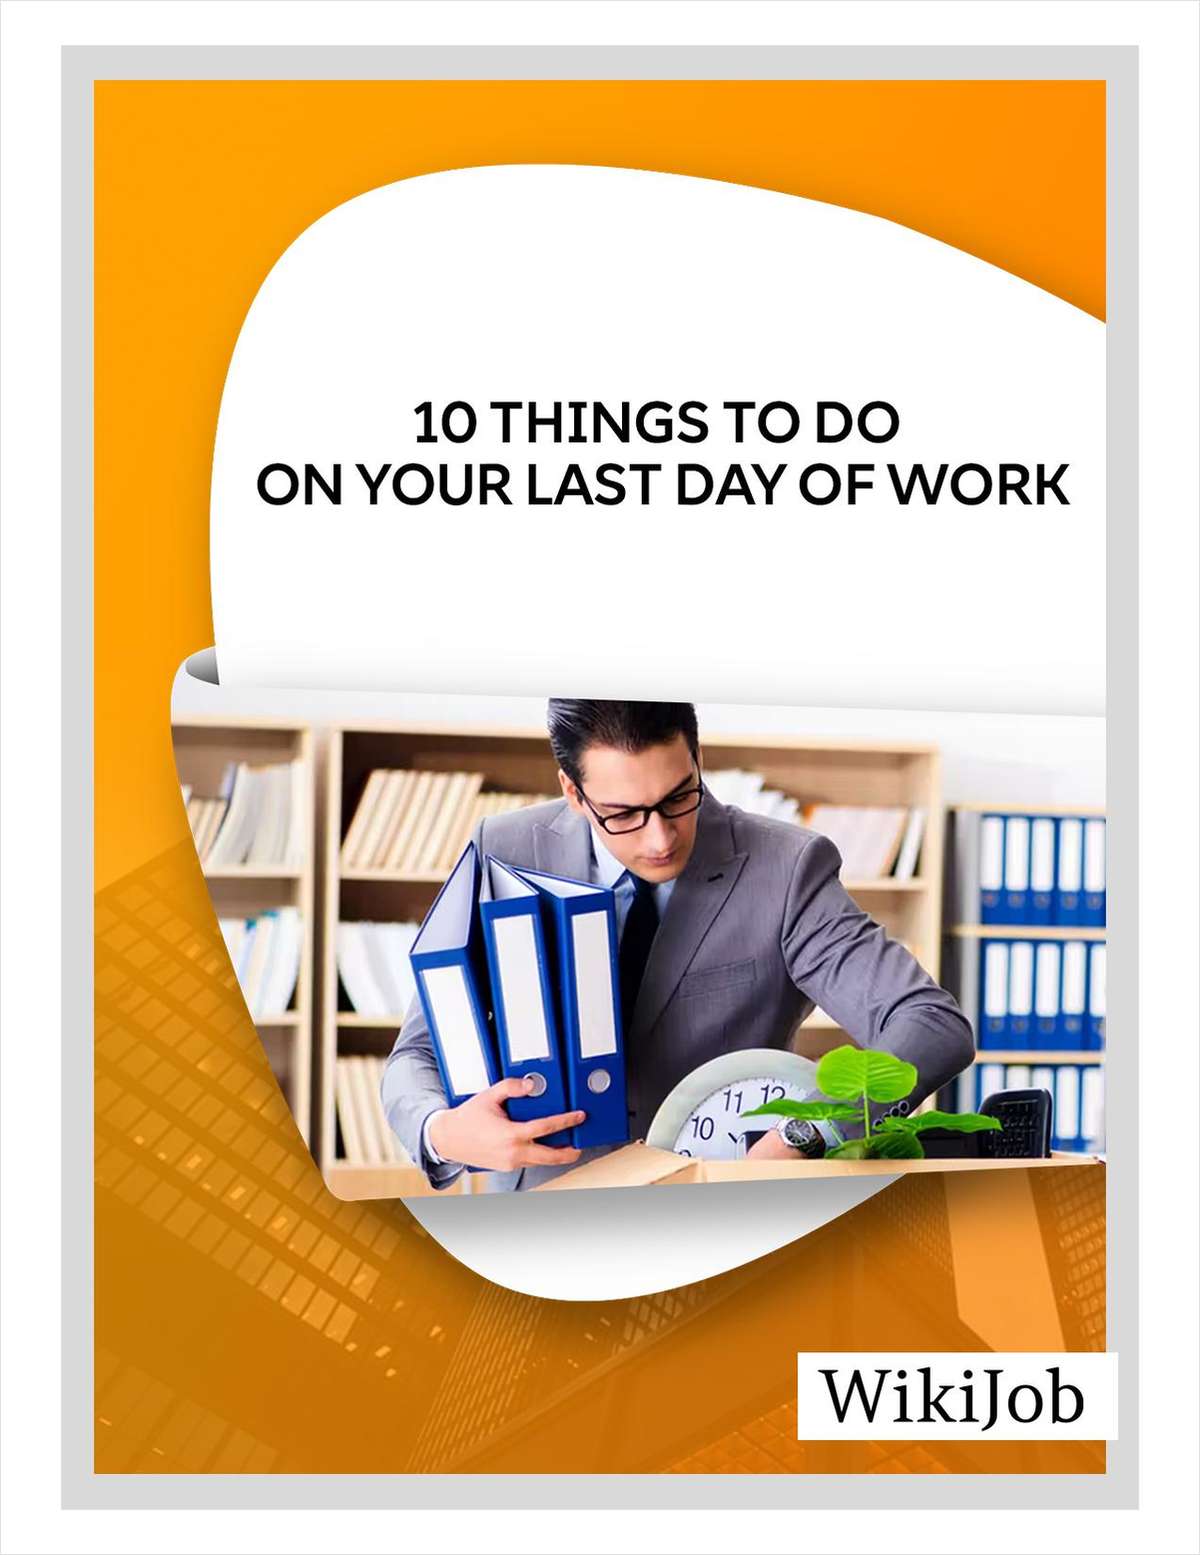 10 Things to Do on Your Last Day of Work